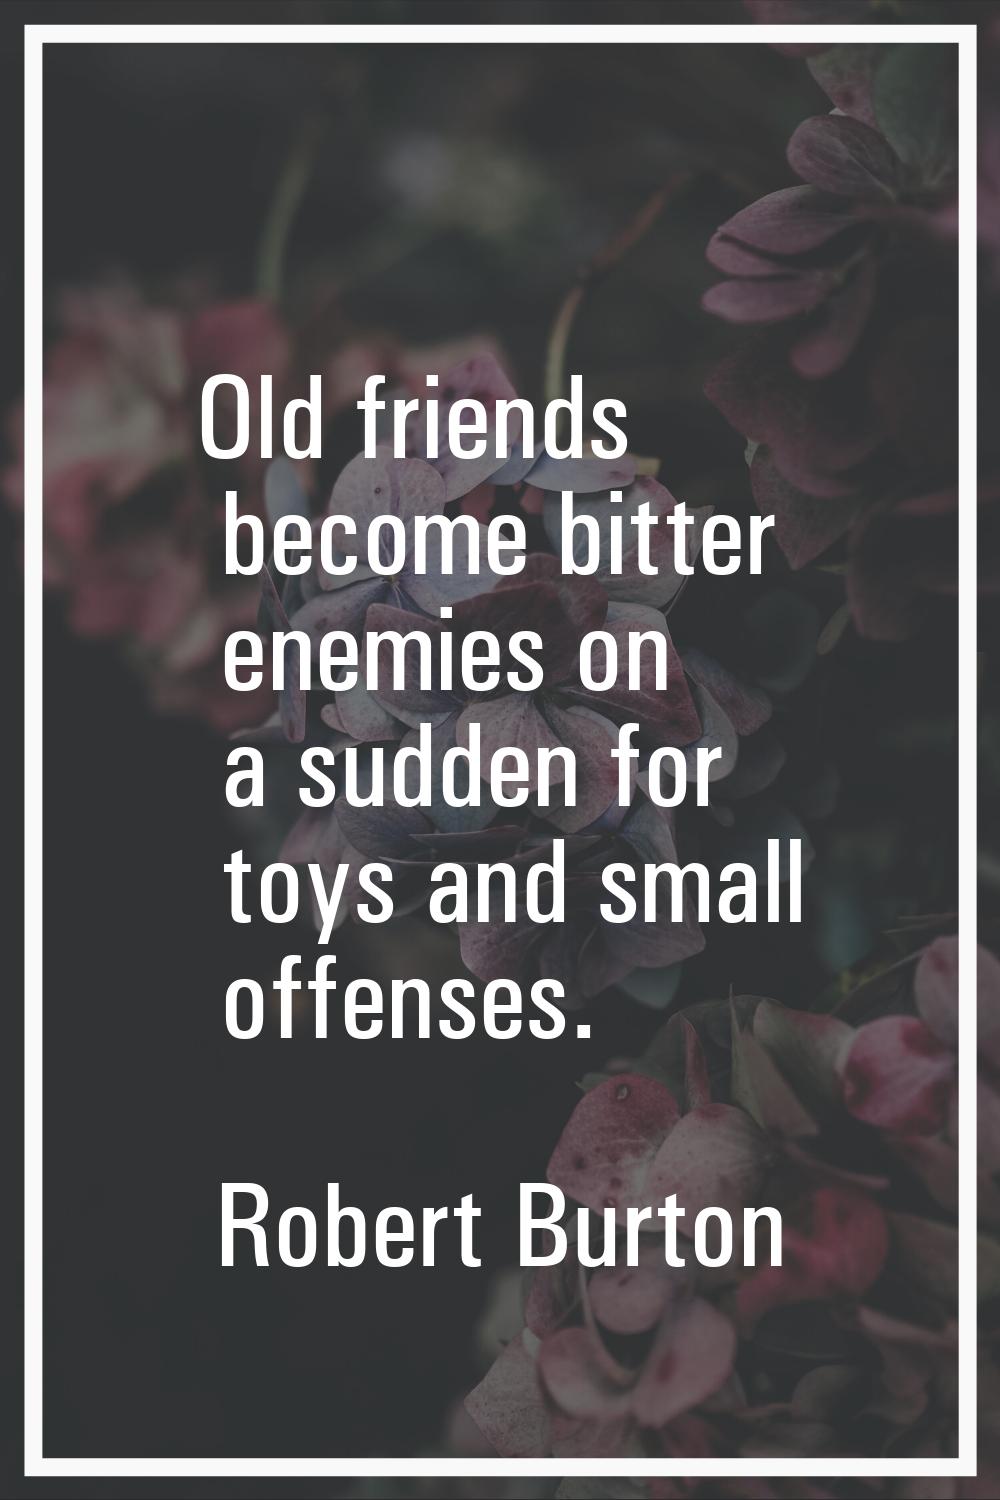 Old friends become bitter enemies on a sudden for toys and small offenses.